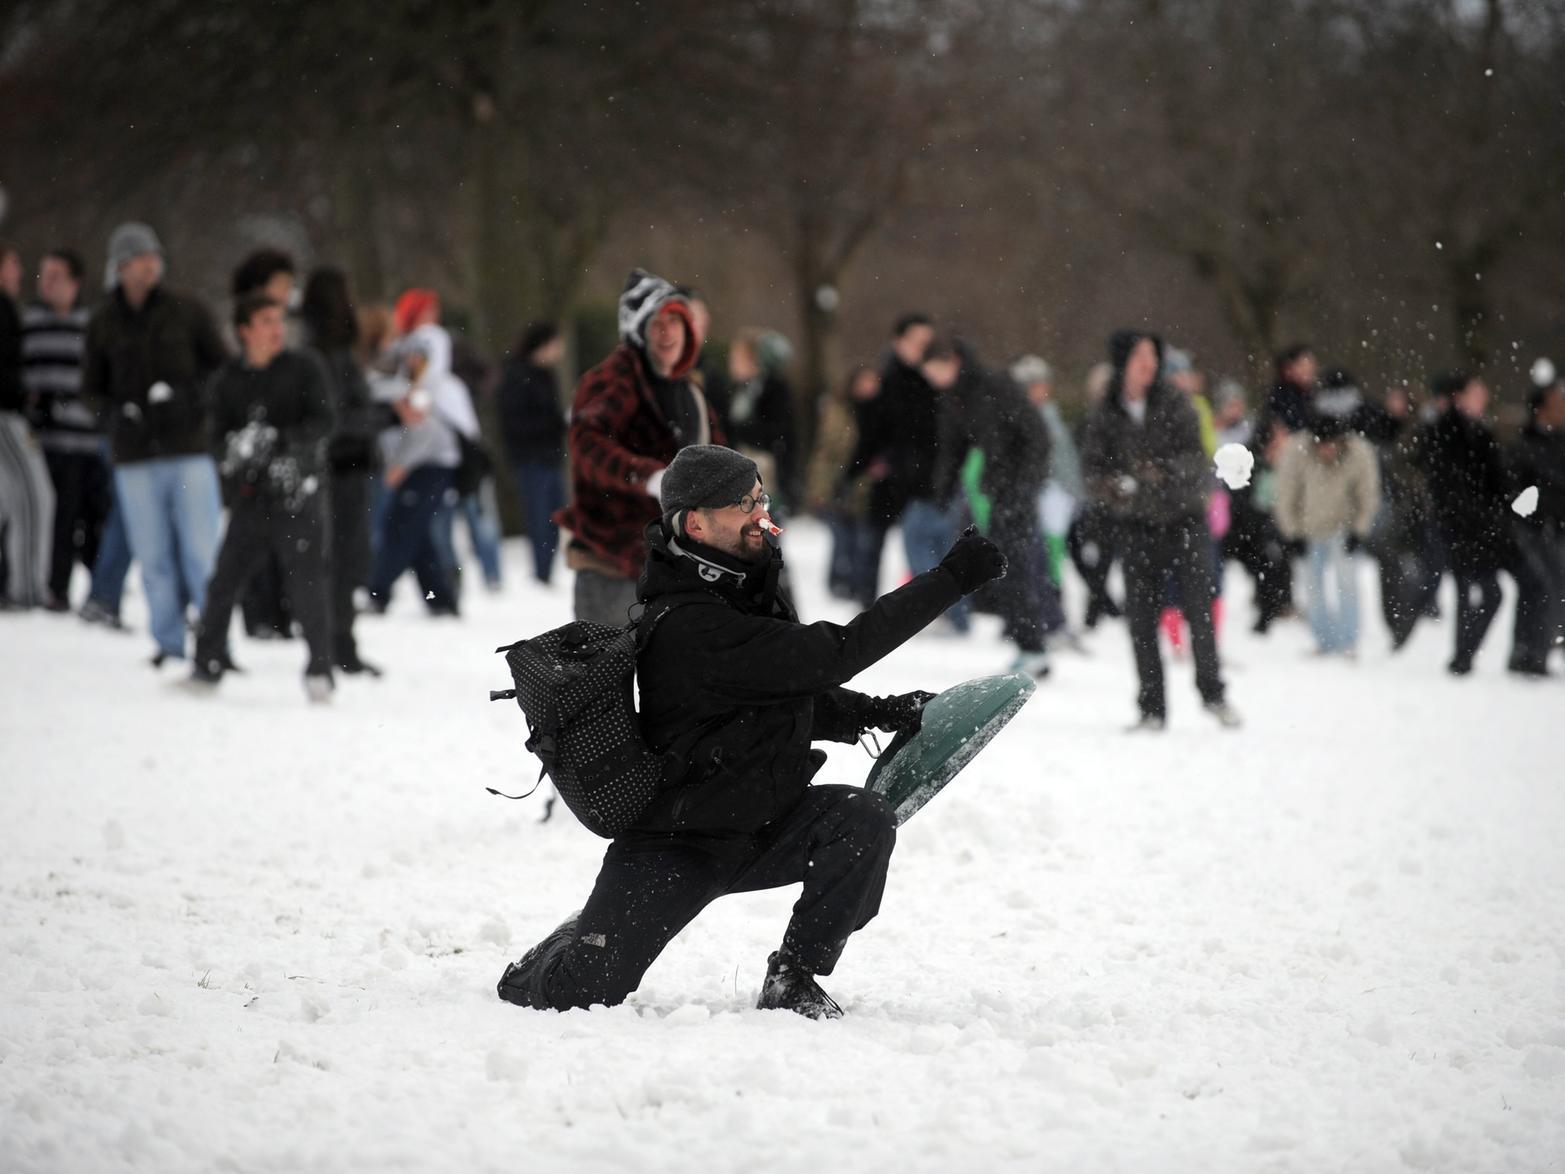 This man leads the snowball attack.